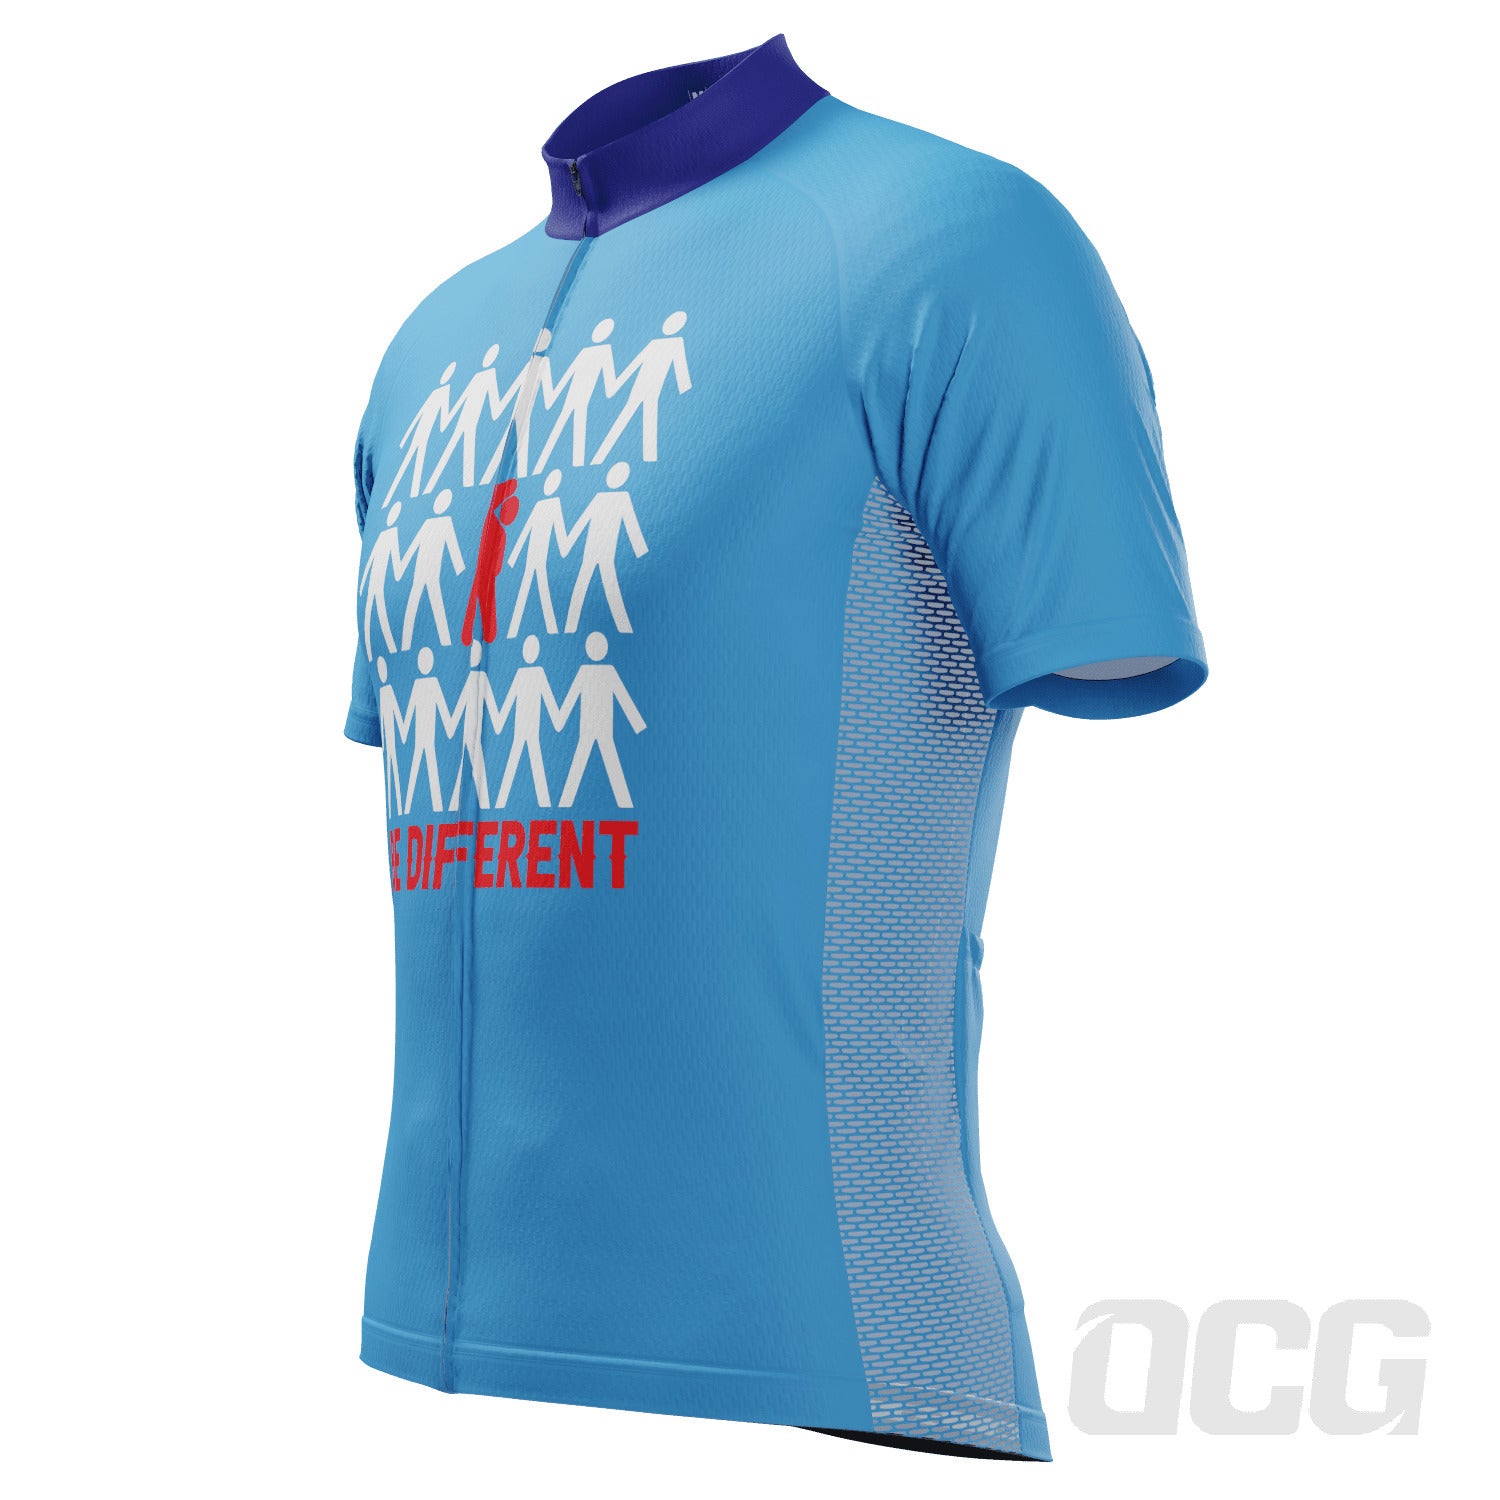 Men's Be Different Short Sleeve Cycling Jersey